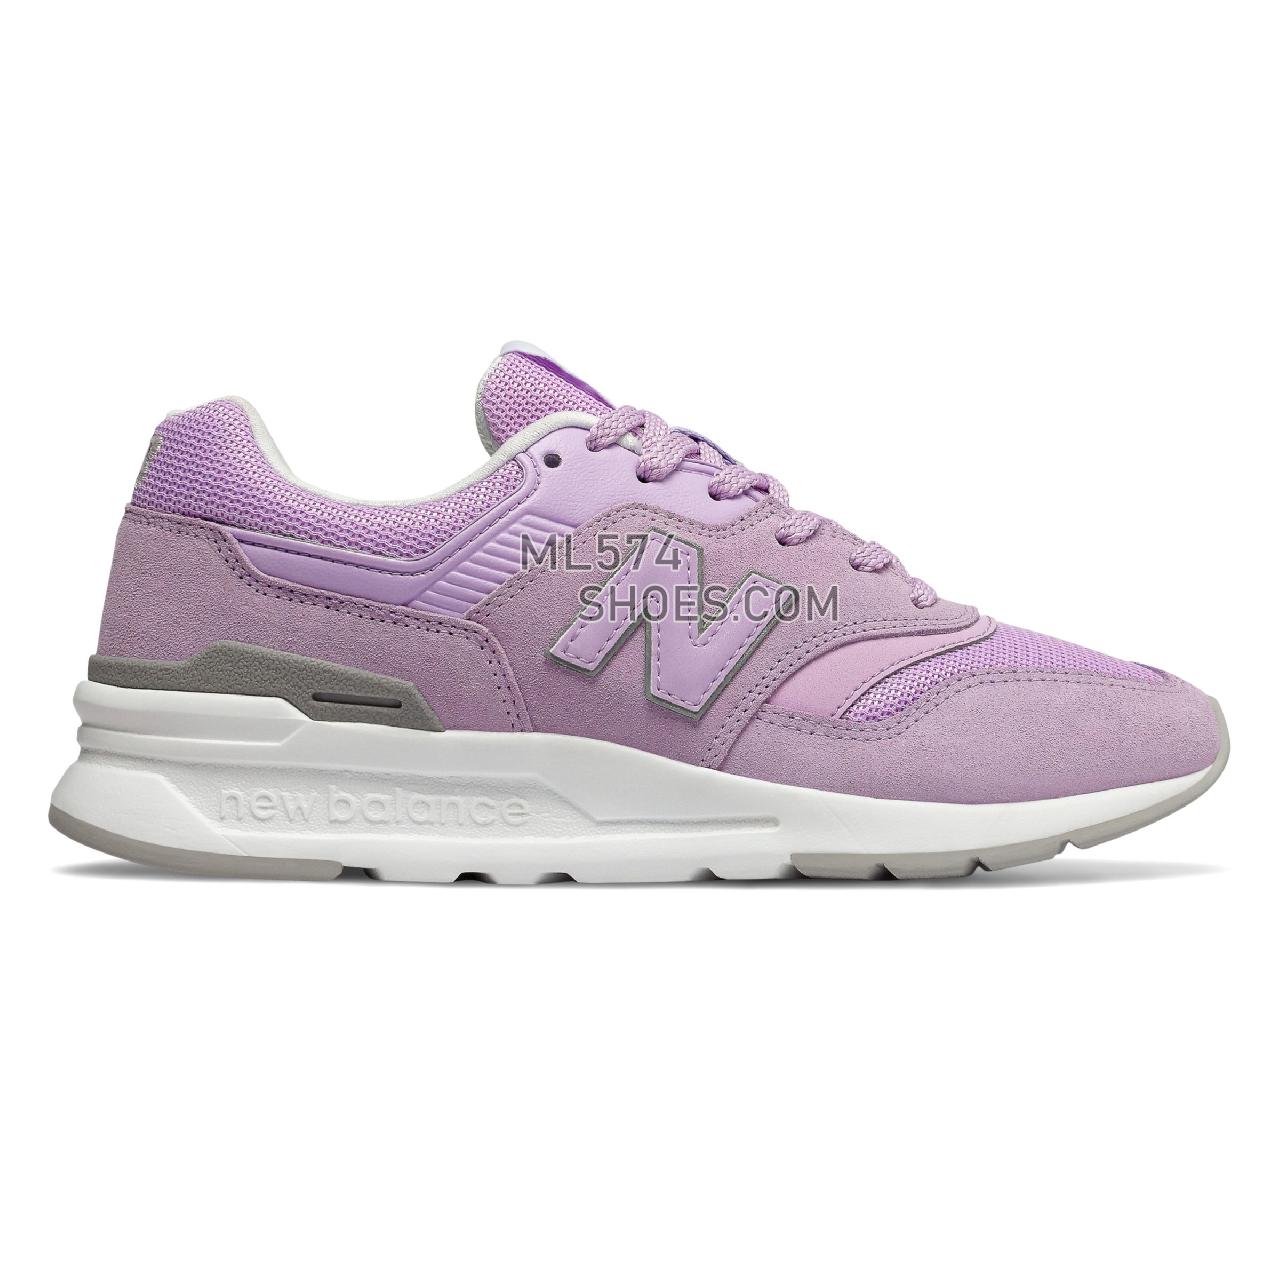 New Balance 997H Classic Essential - Women's Sport Style Sneakers - Light Cyclone with White - CW997HCC